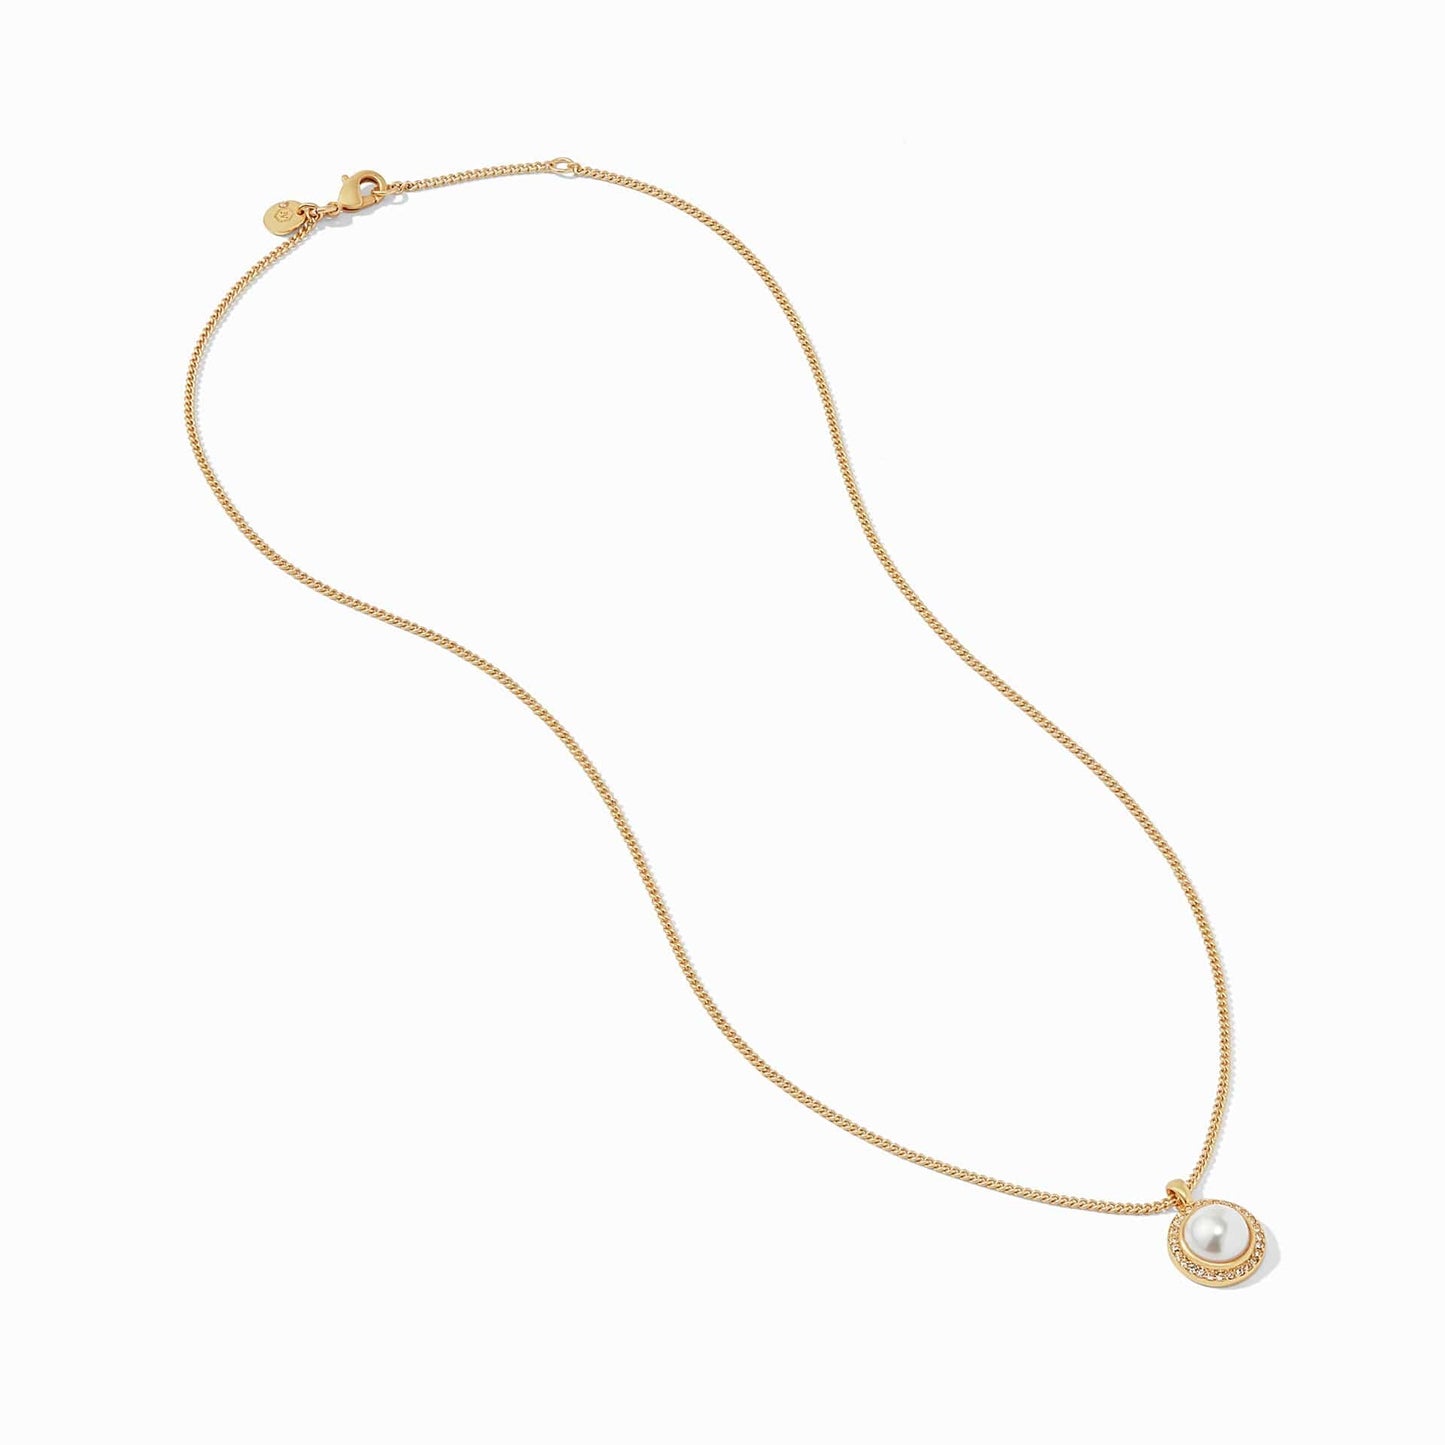 NKL-GPL Odette Pearl Solitaire Necklace